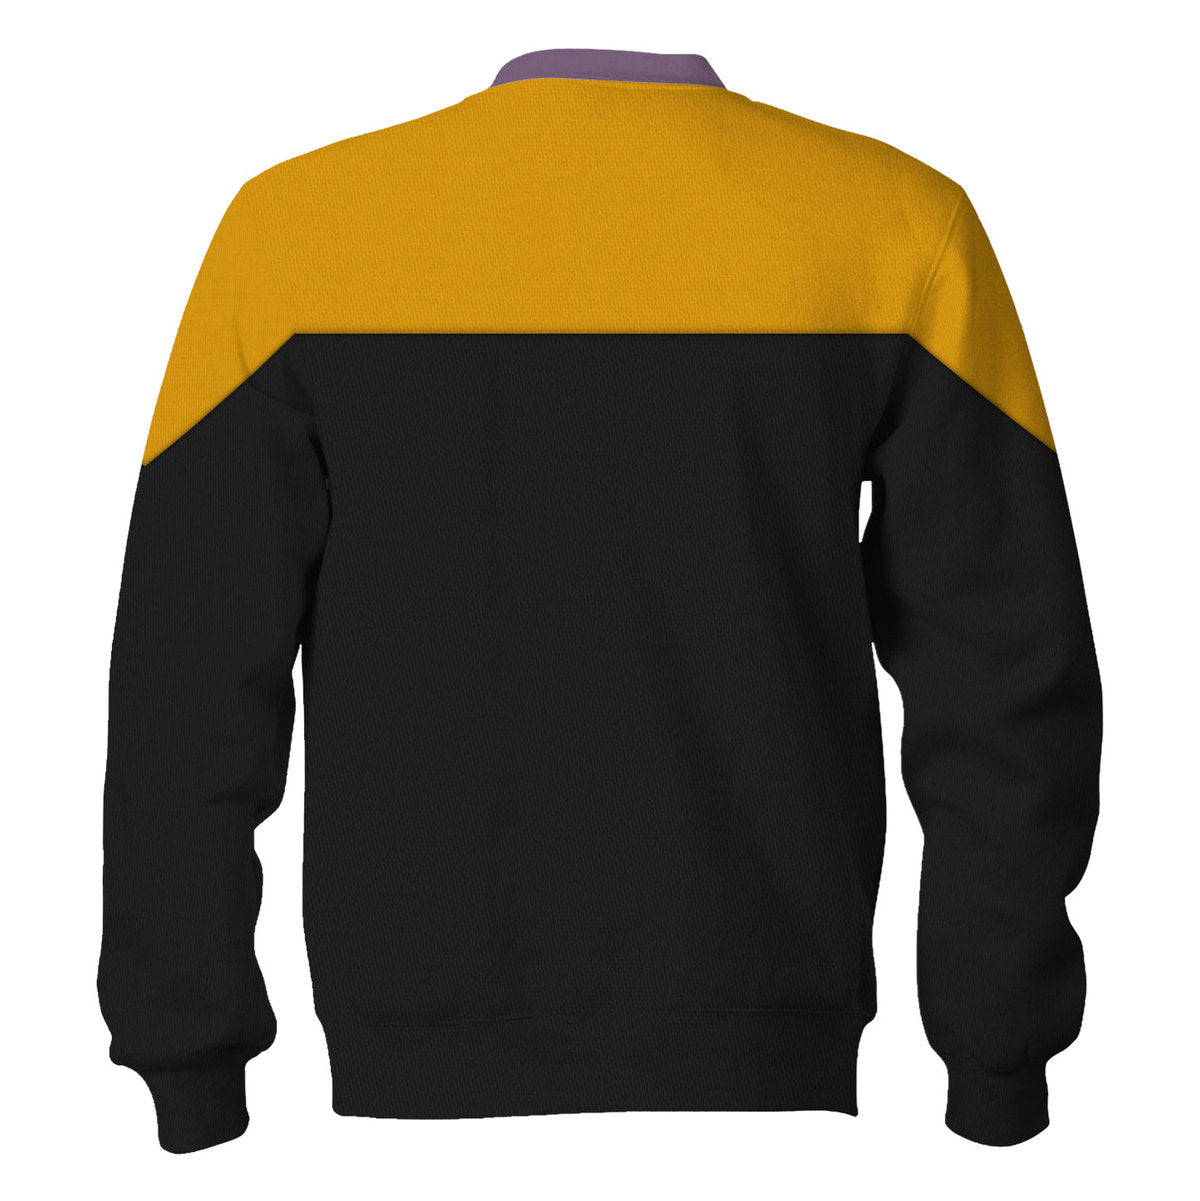 Star Trek Voyager Yellow Costume Cool - Sweater - Ugly Christmas Sweater